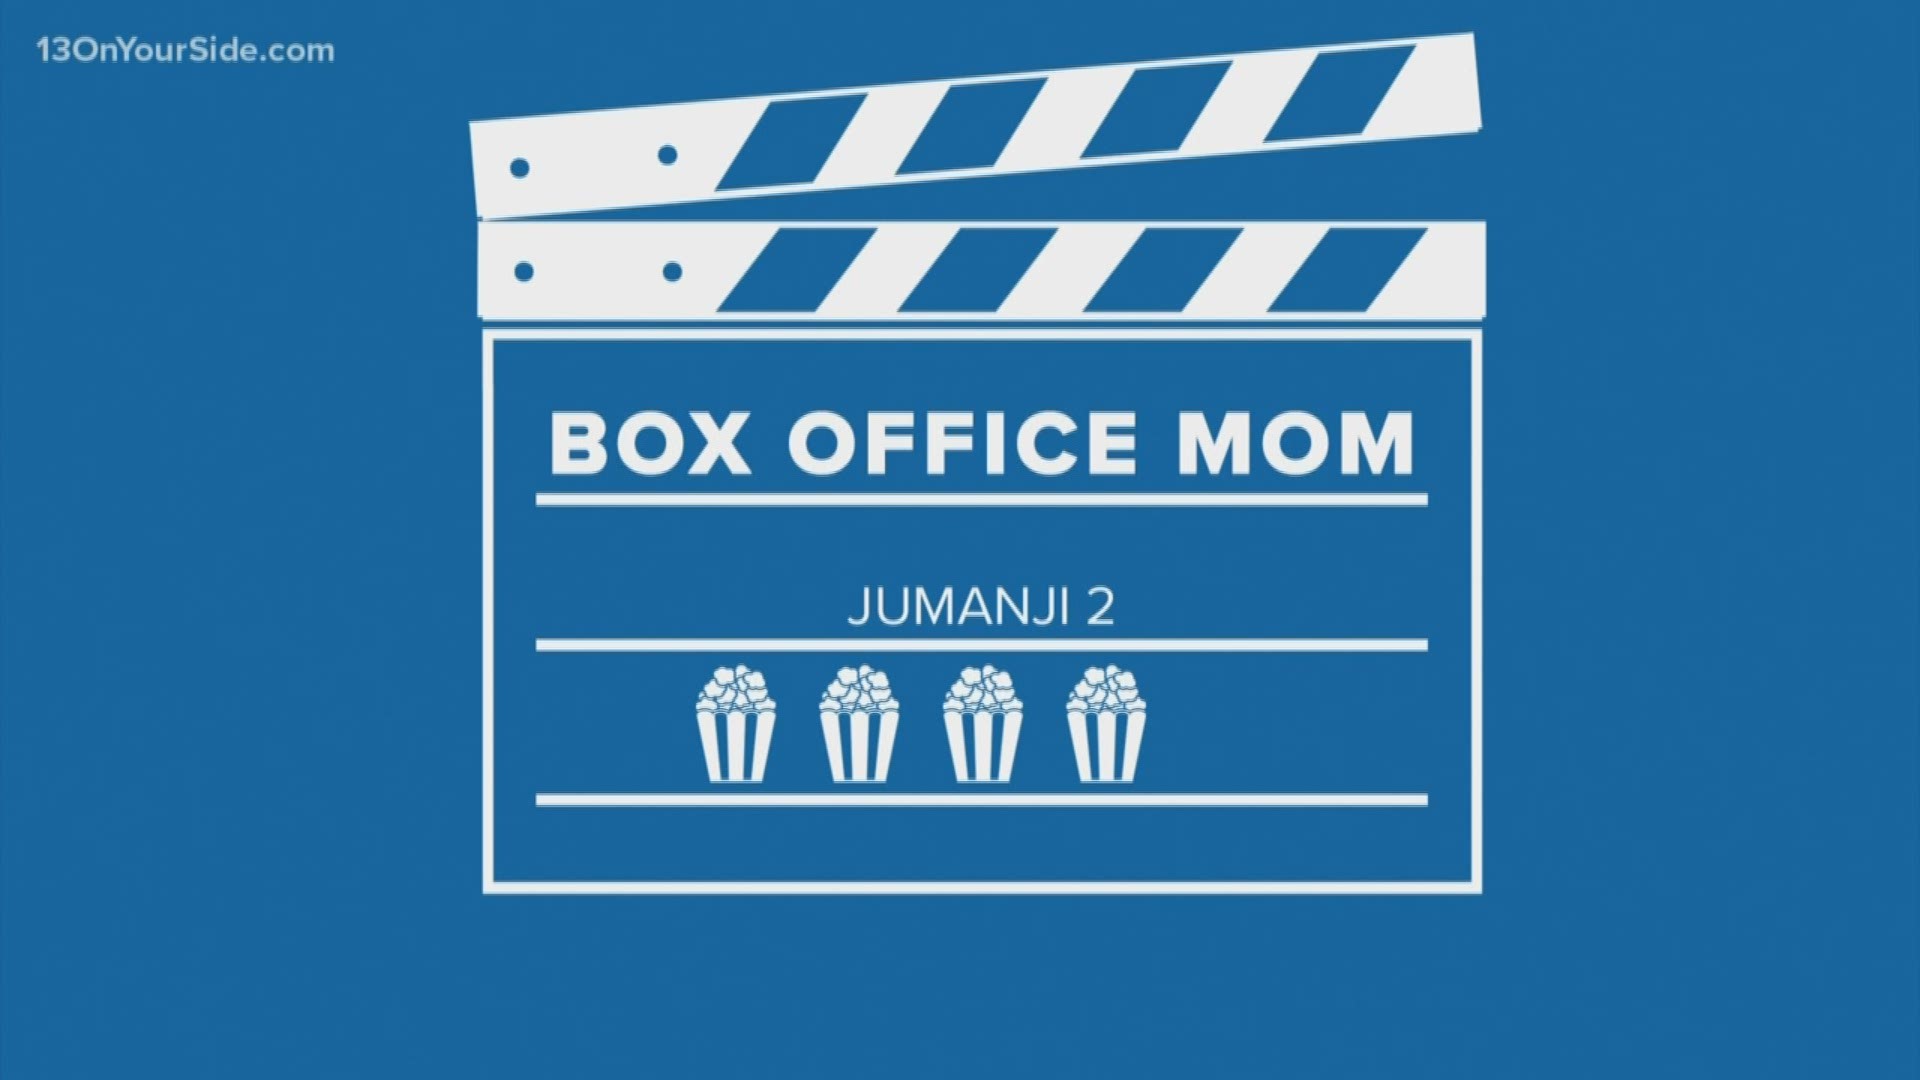 Our Box Office Mom Jackie Solberg reviews two new movies from a parent's point of view.